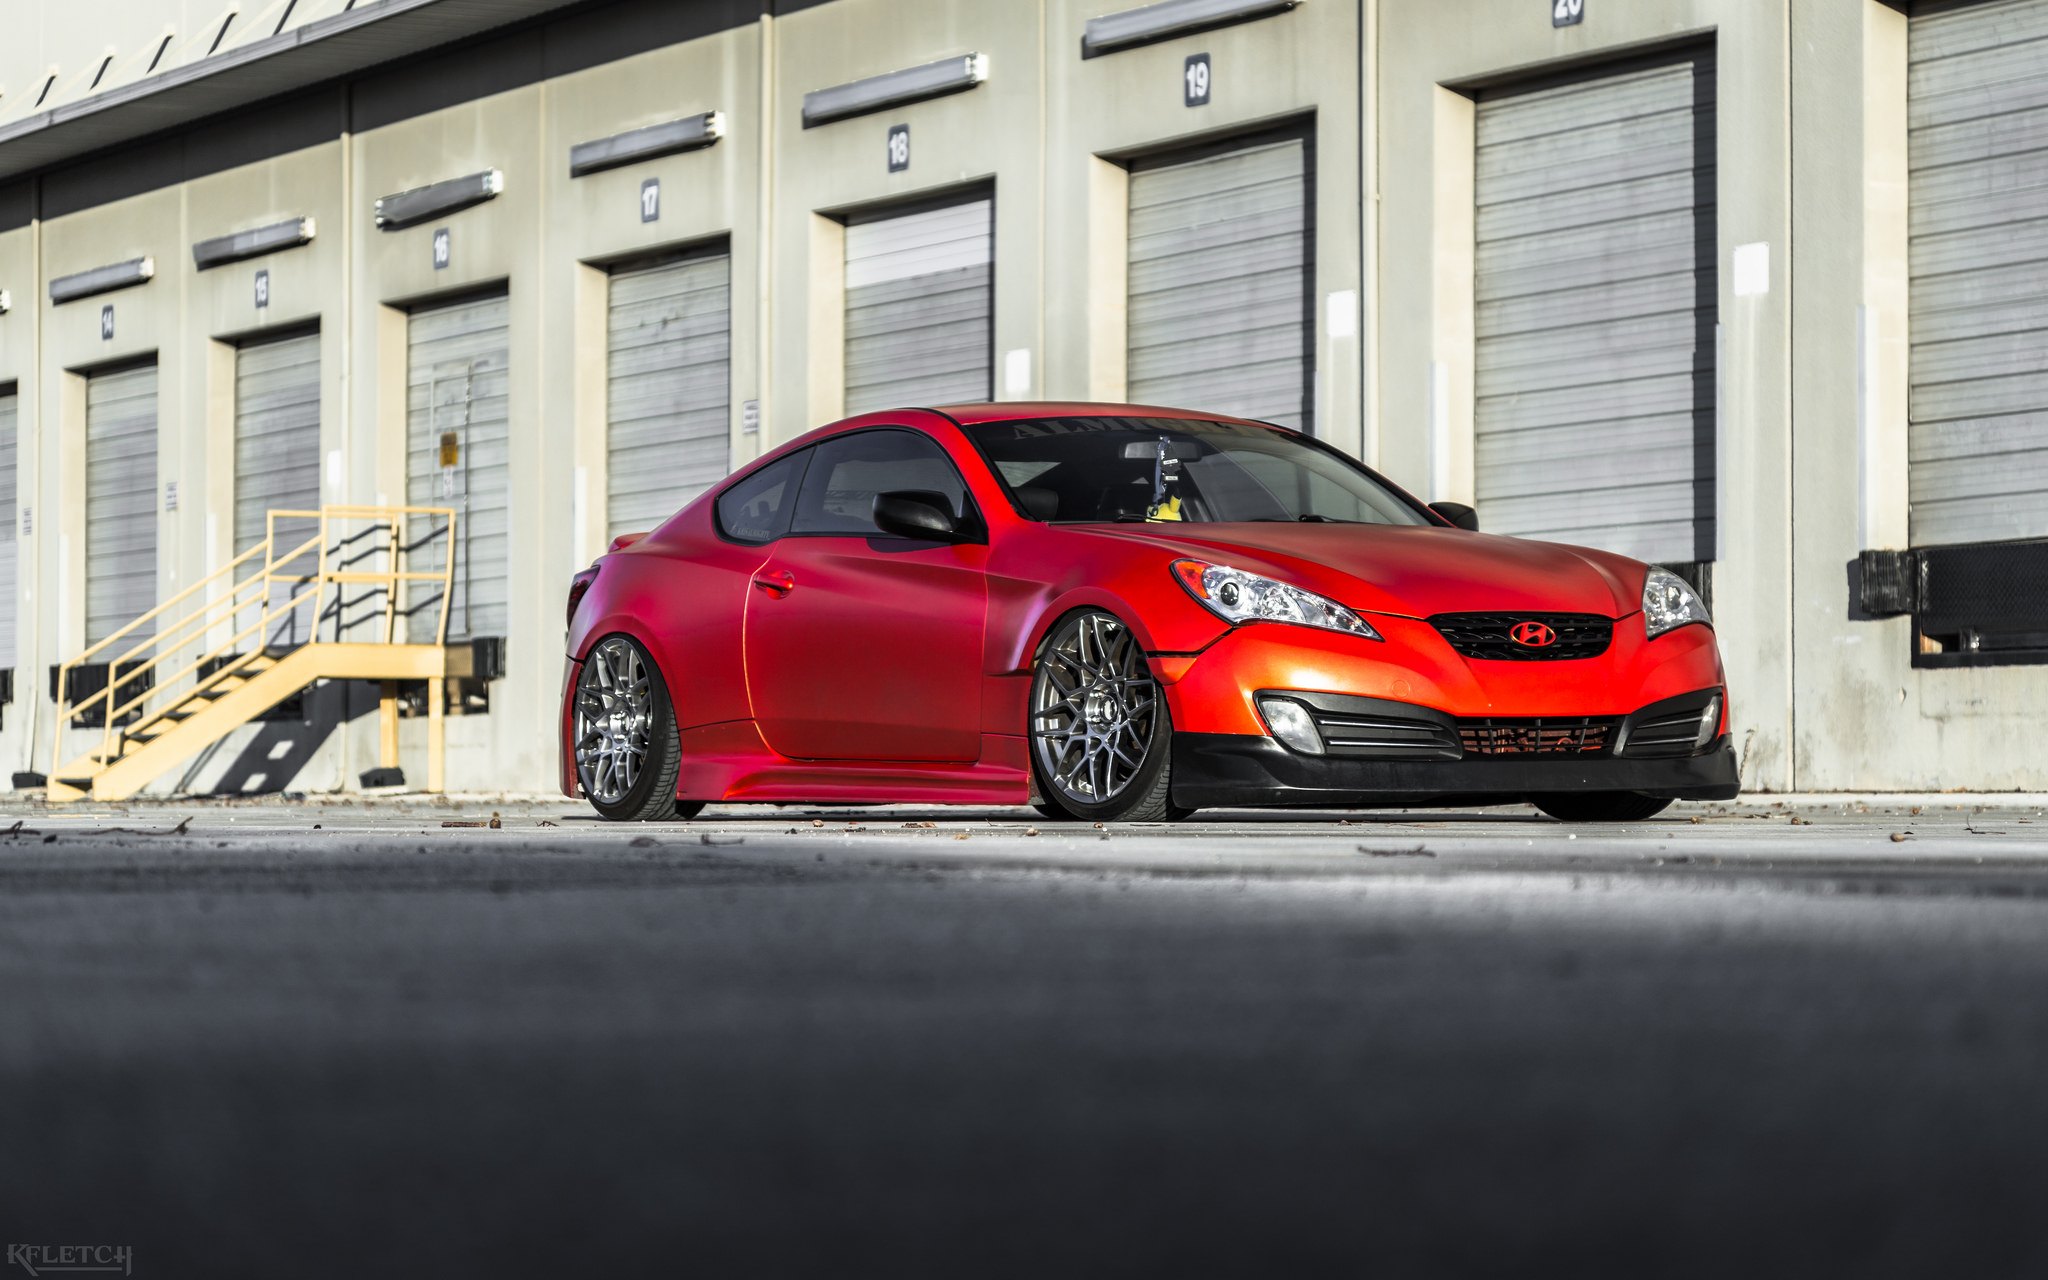 Red Hyundai Genesis Coupe with Custom Chrome Wheels - Photo by kyle Fletcher